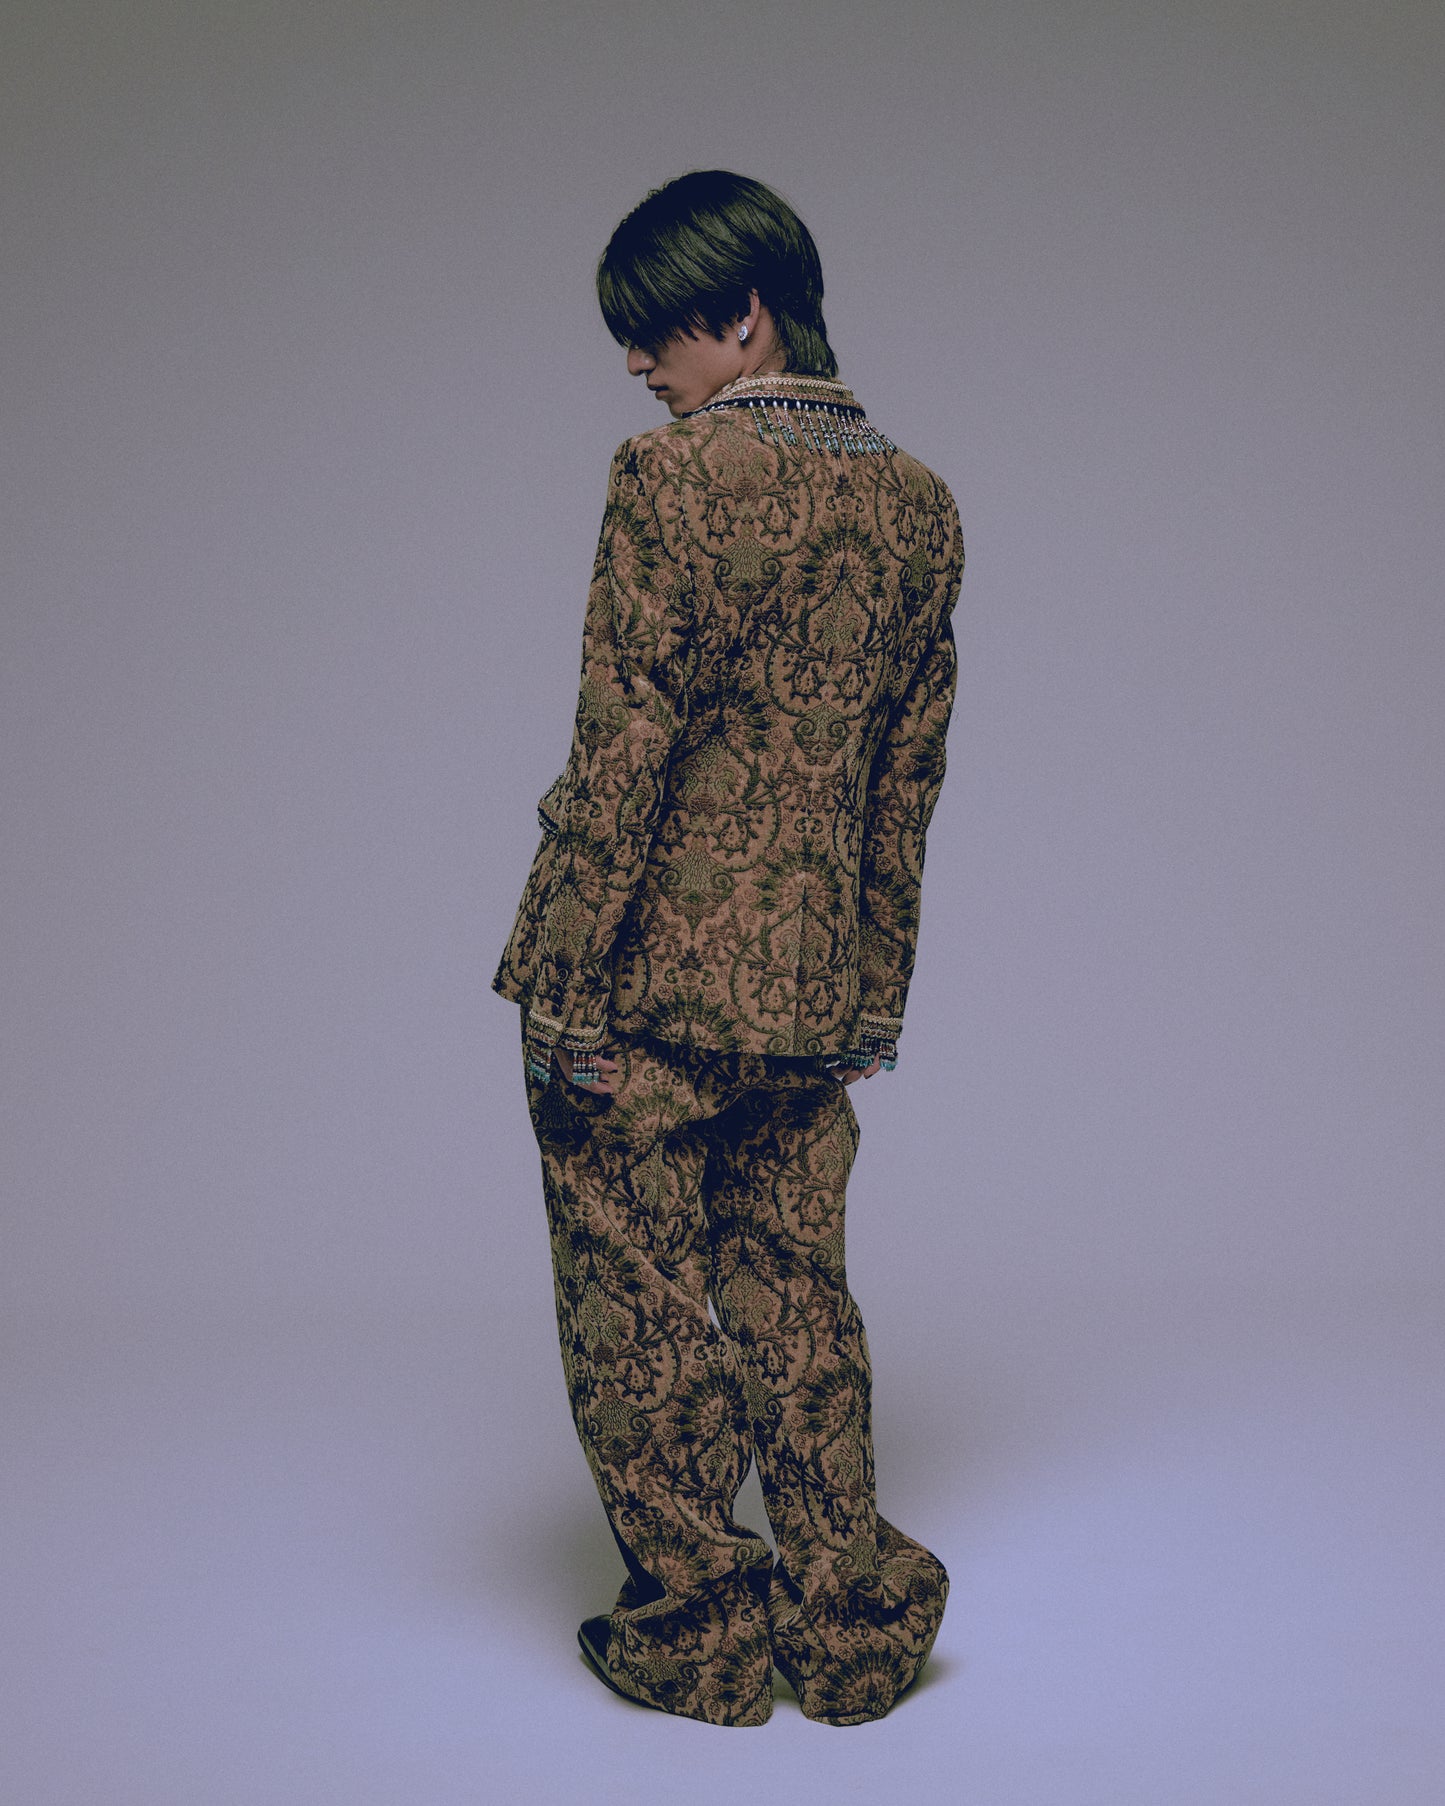 arabesque jacquard pants Camel【Delivery in December 2023】